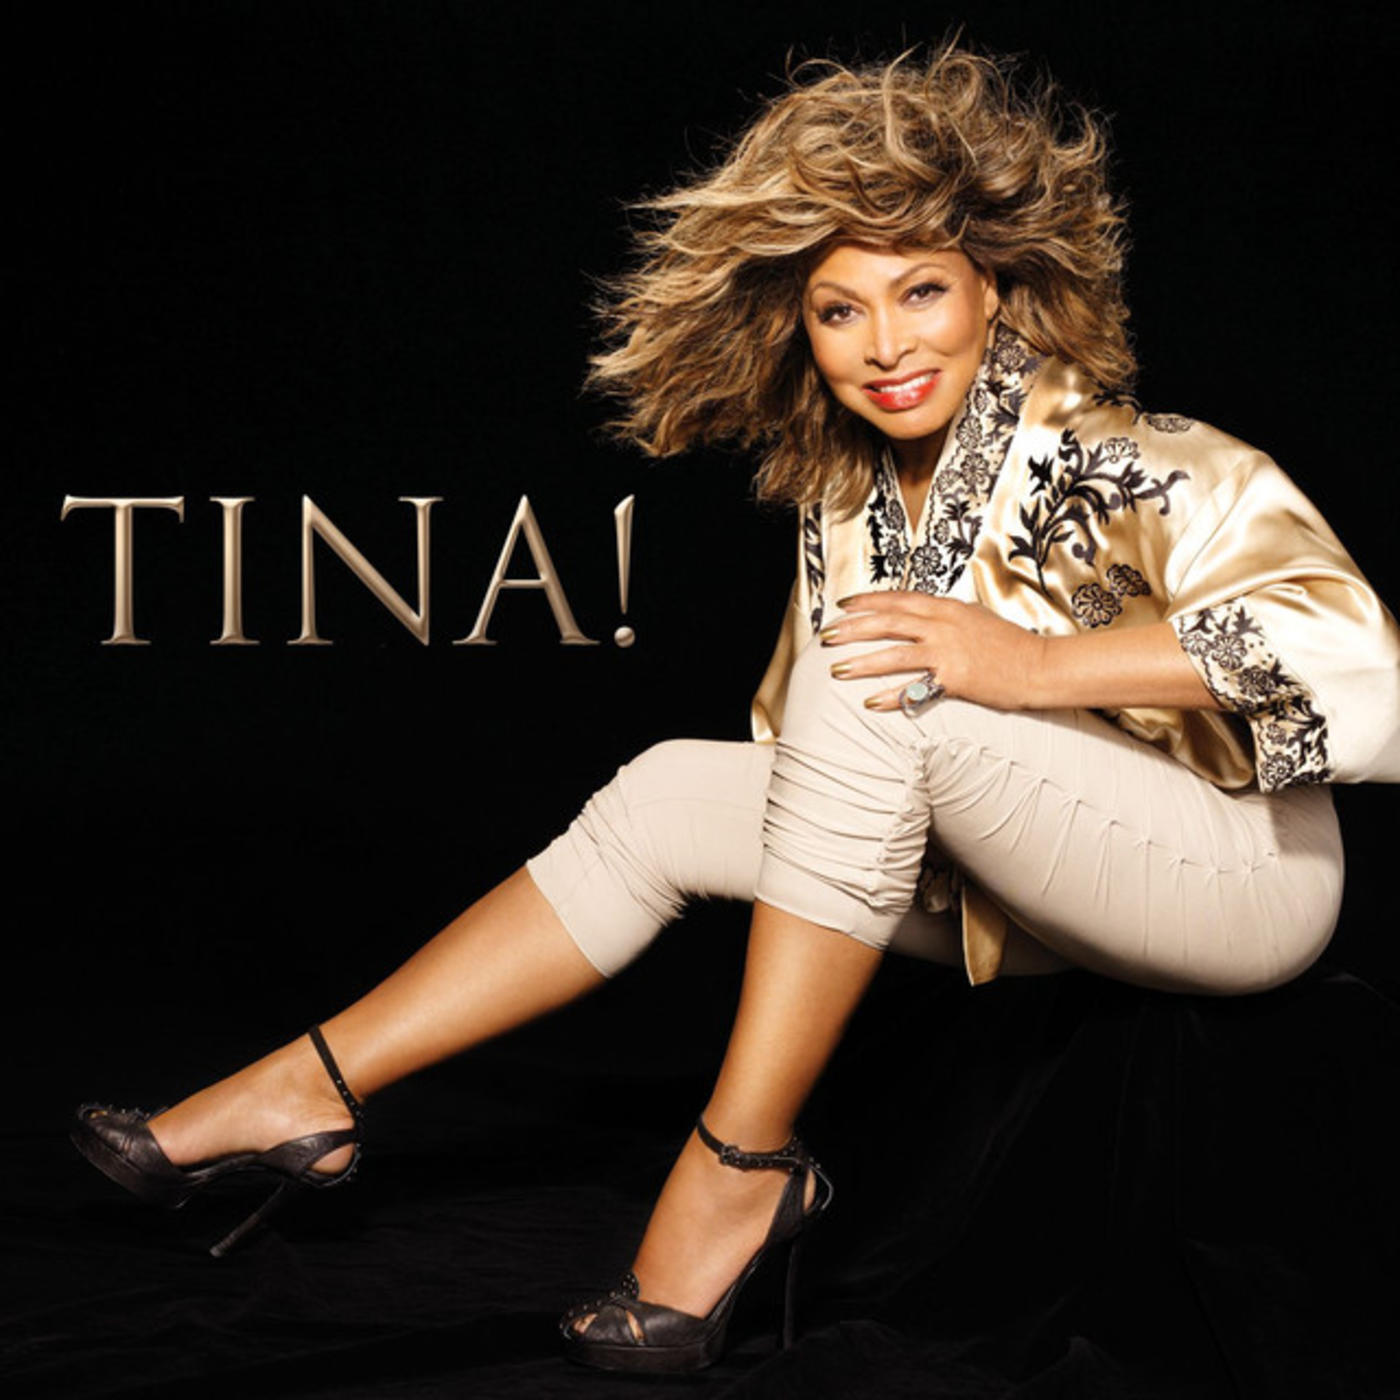 tina turner tour what's love got to do with it